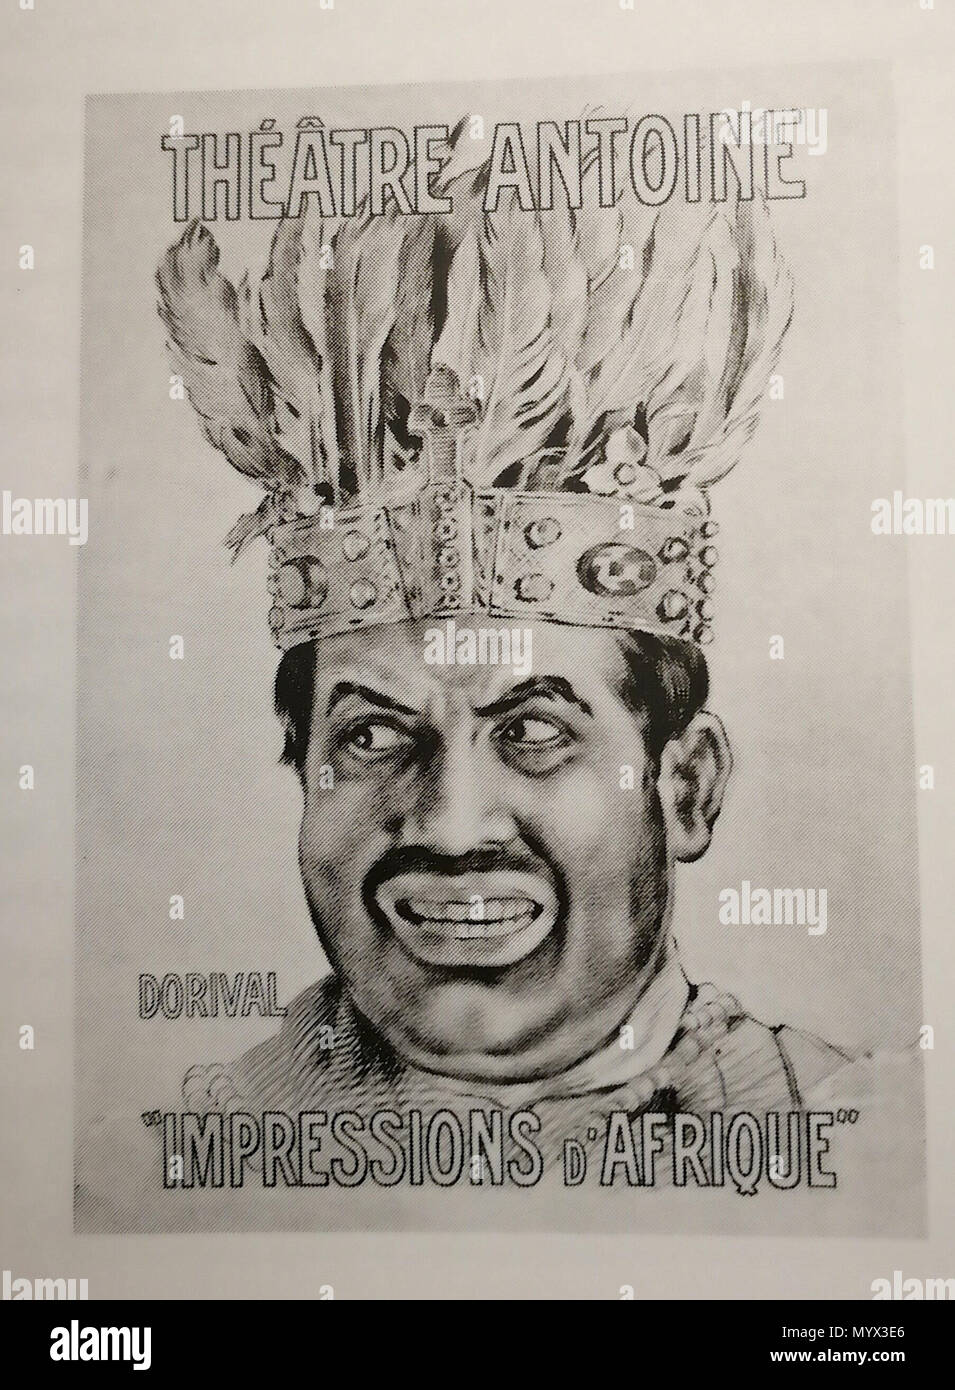 . English: Printed Poster for Impressions d'Afrique, from Raymond Roussel's novel Impressions d'Afrique, enacted by the actor Georges Dorival as King Talou VII — Théâtre Antoine, Paris.  . 1912. Pierre Hodé (1889-1942) ?? or from an anonymous photographic work taken from the stage 27 Dorival Roussel Theatre Antoine Stock Photo